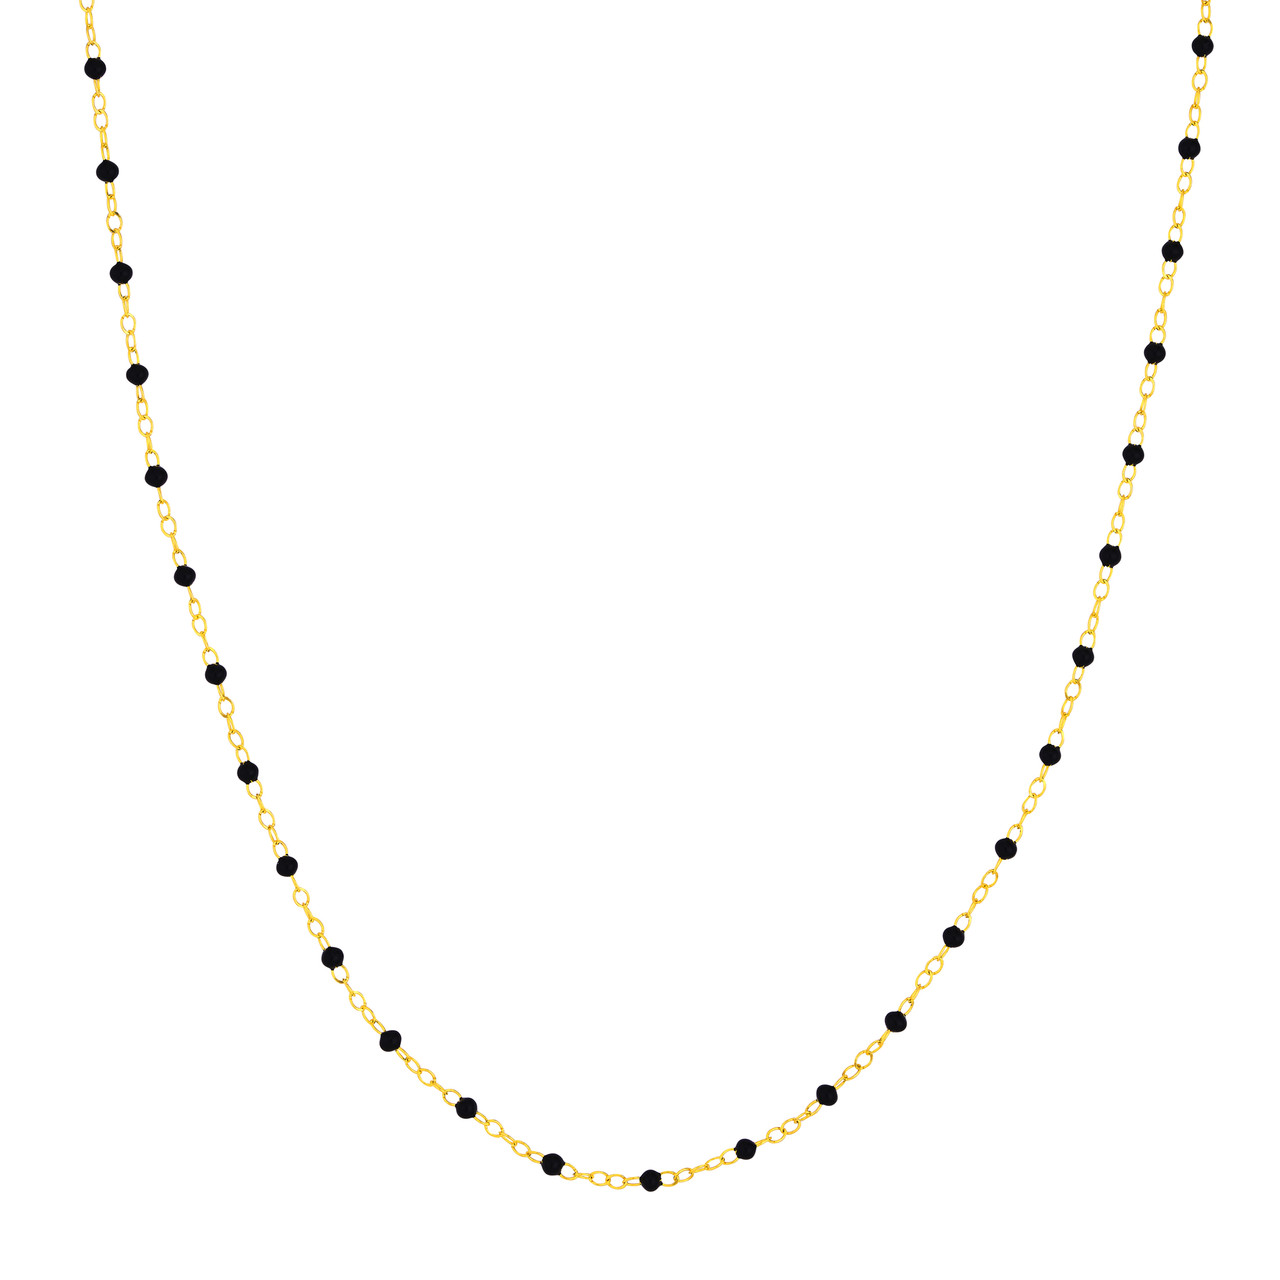 Yellow Gold Black Enamel Bead Chain Necklace l 18 inches